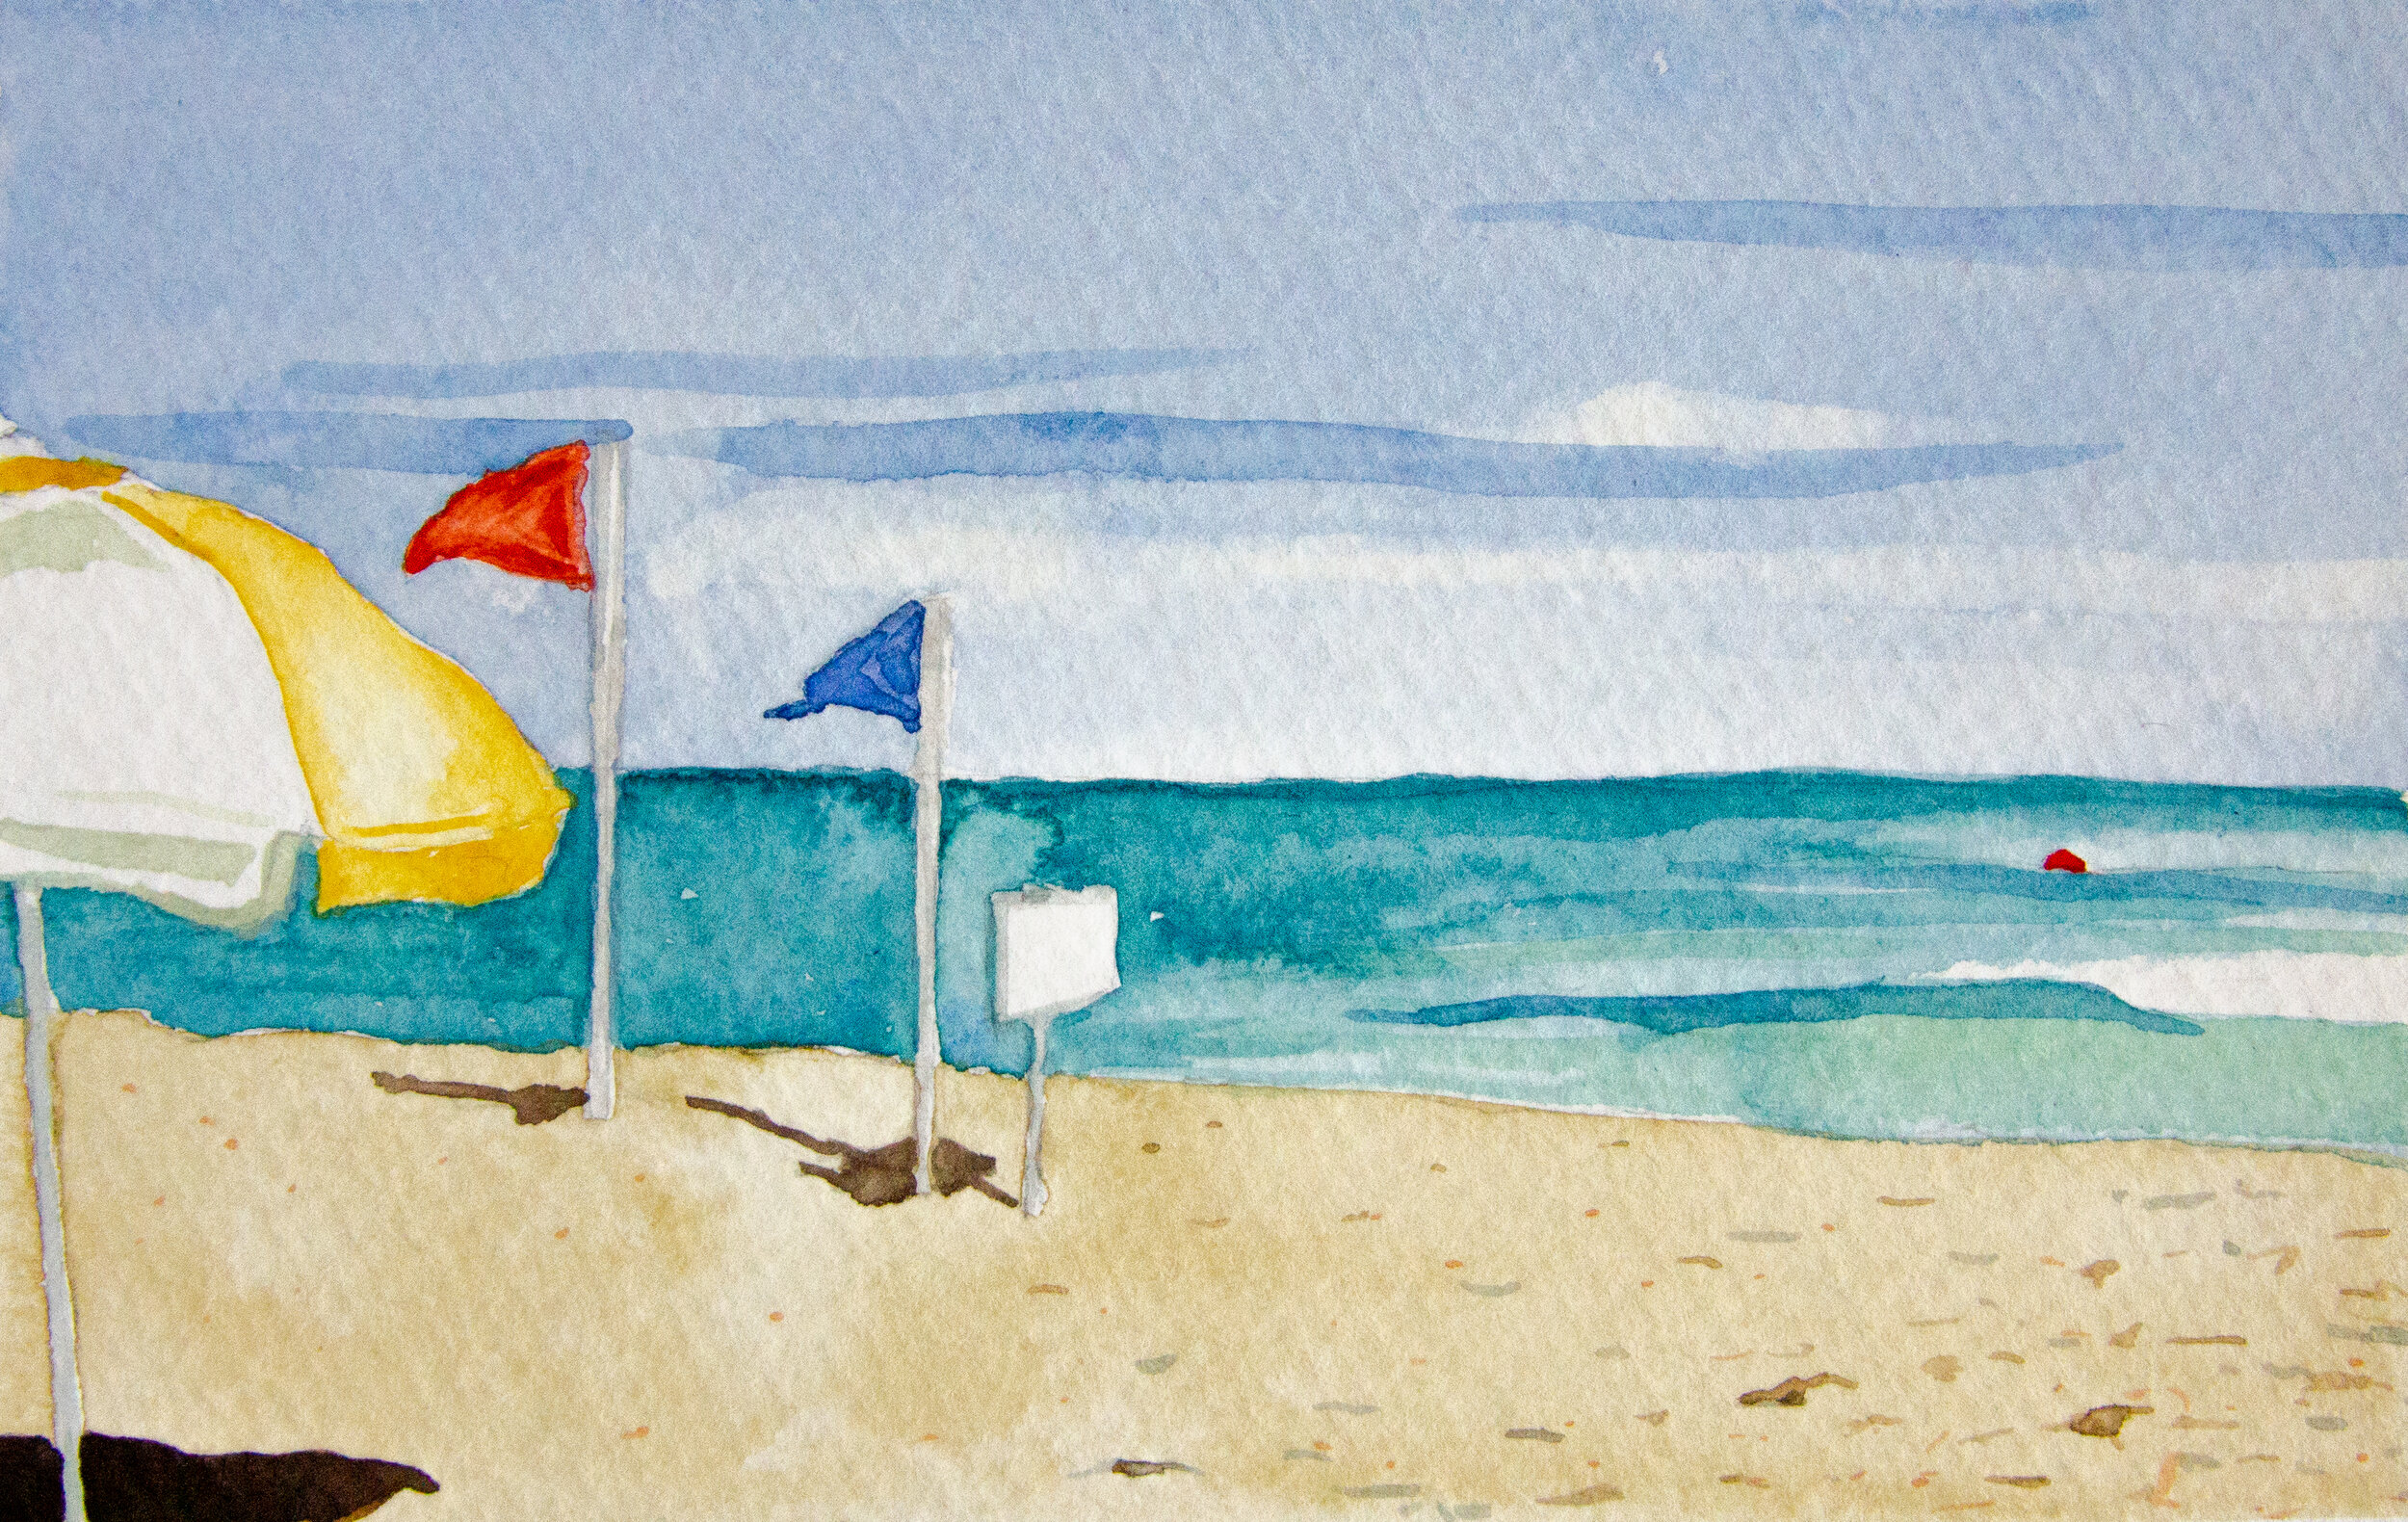 Lifeguard Staged This - 4"x6" SOLD